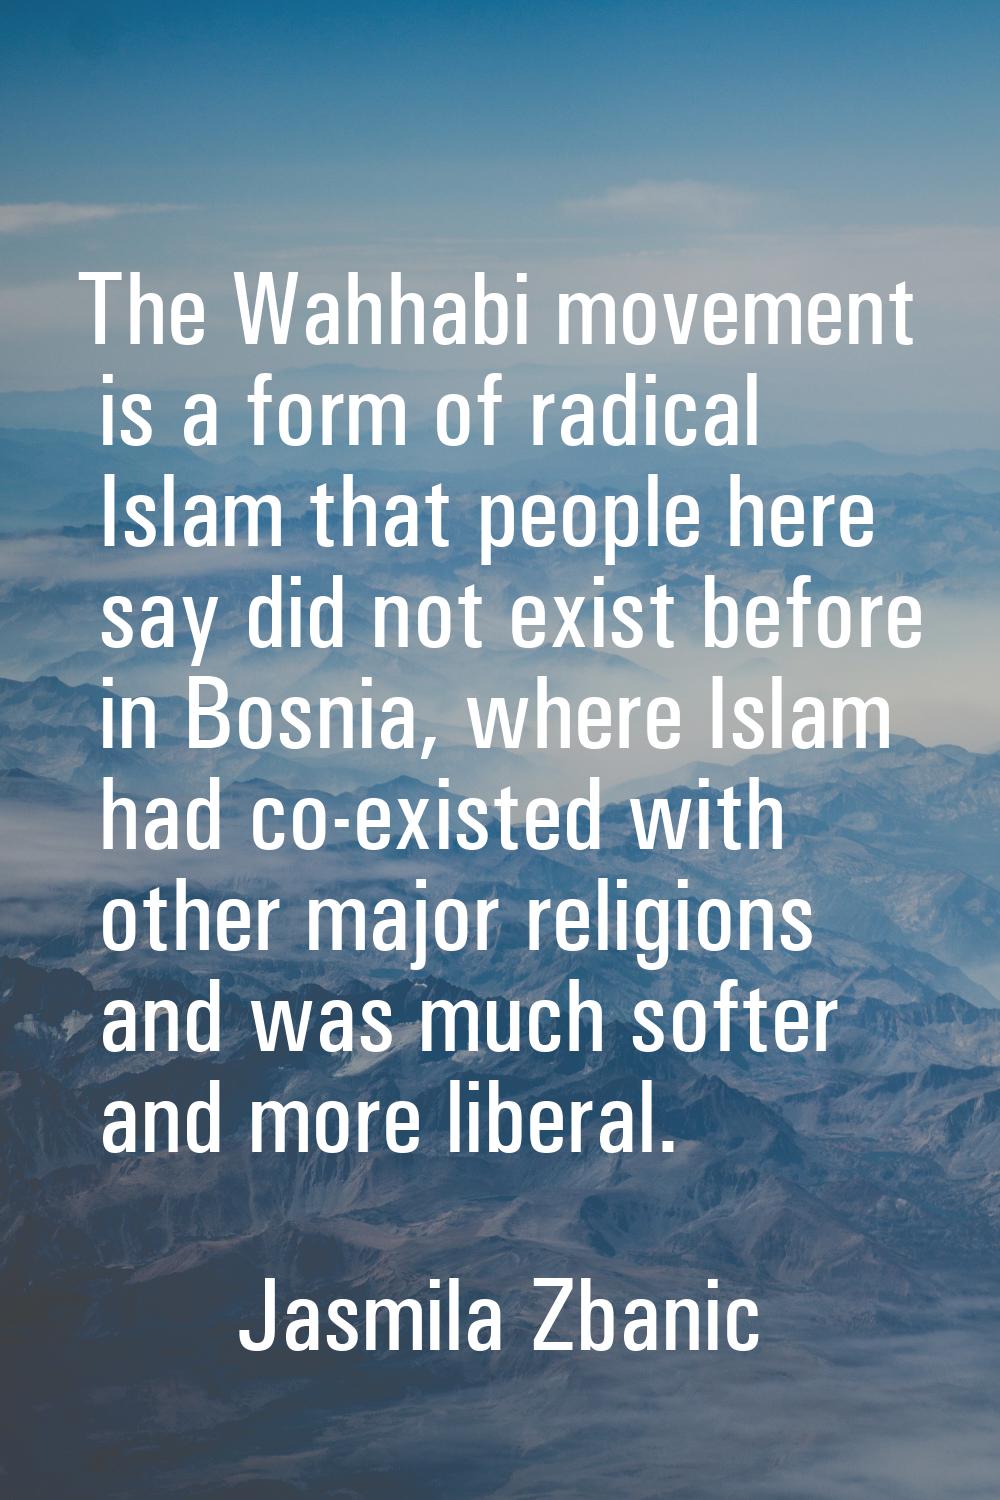 The Wahhabi movement is a form of radical Islam that people here say did not exist before in Bosnia